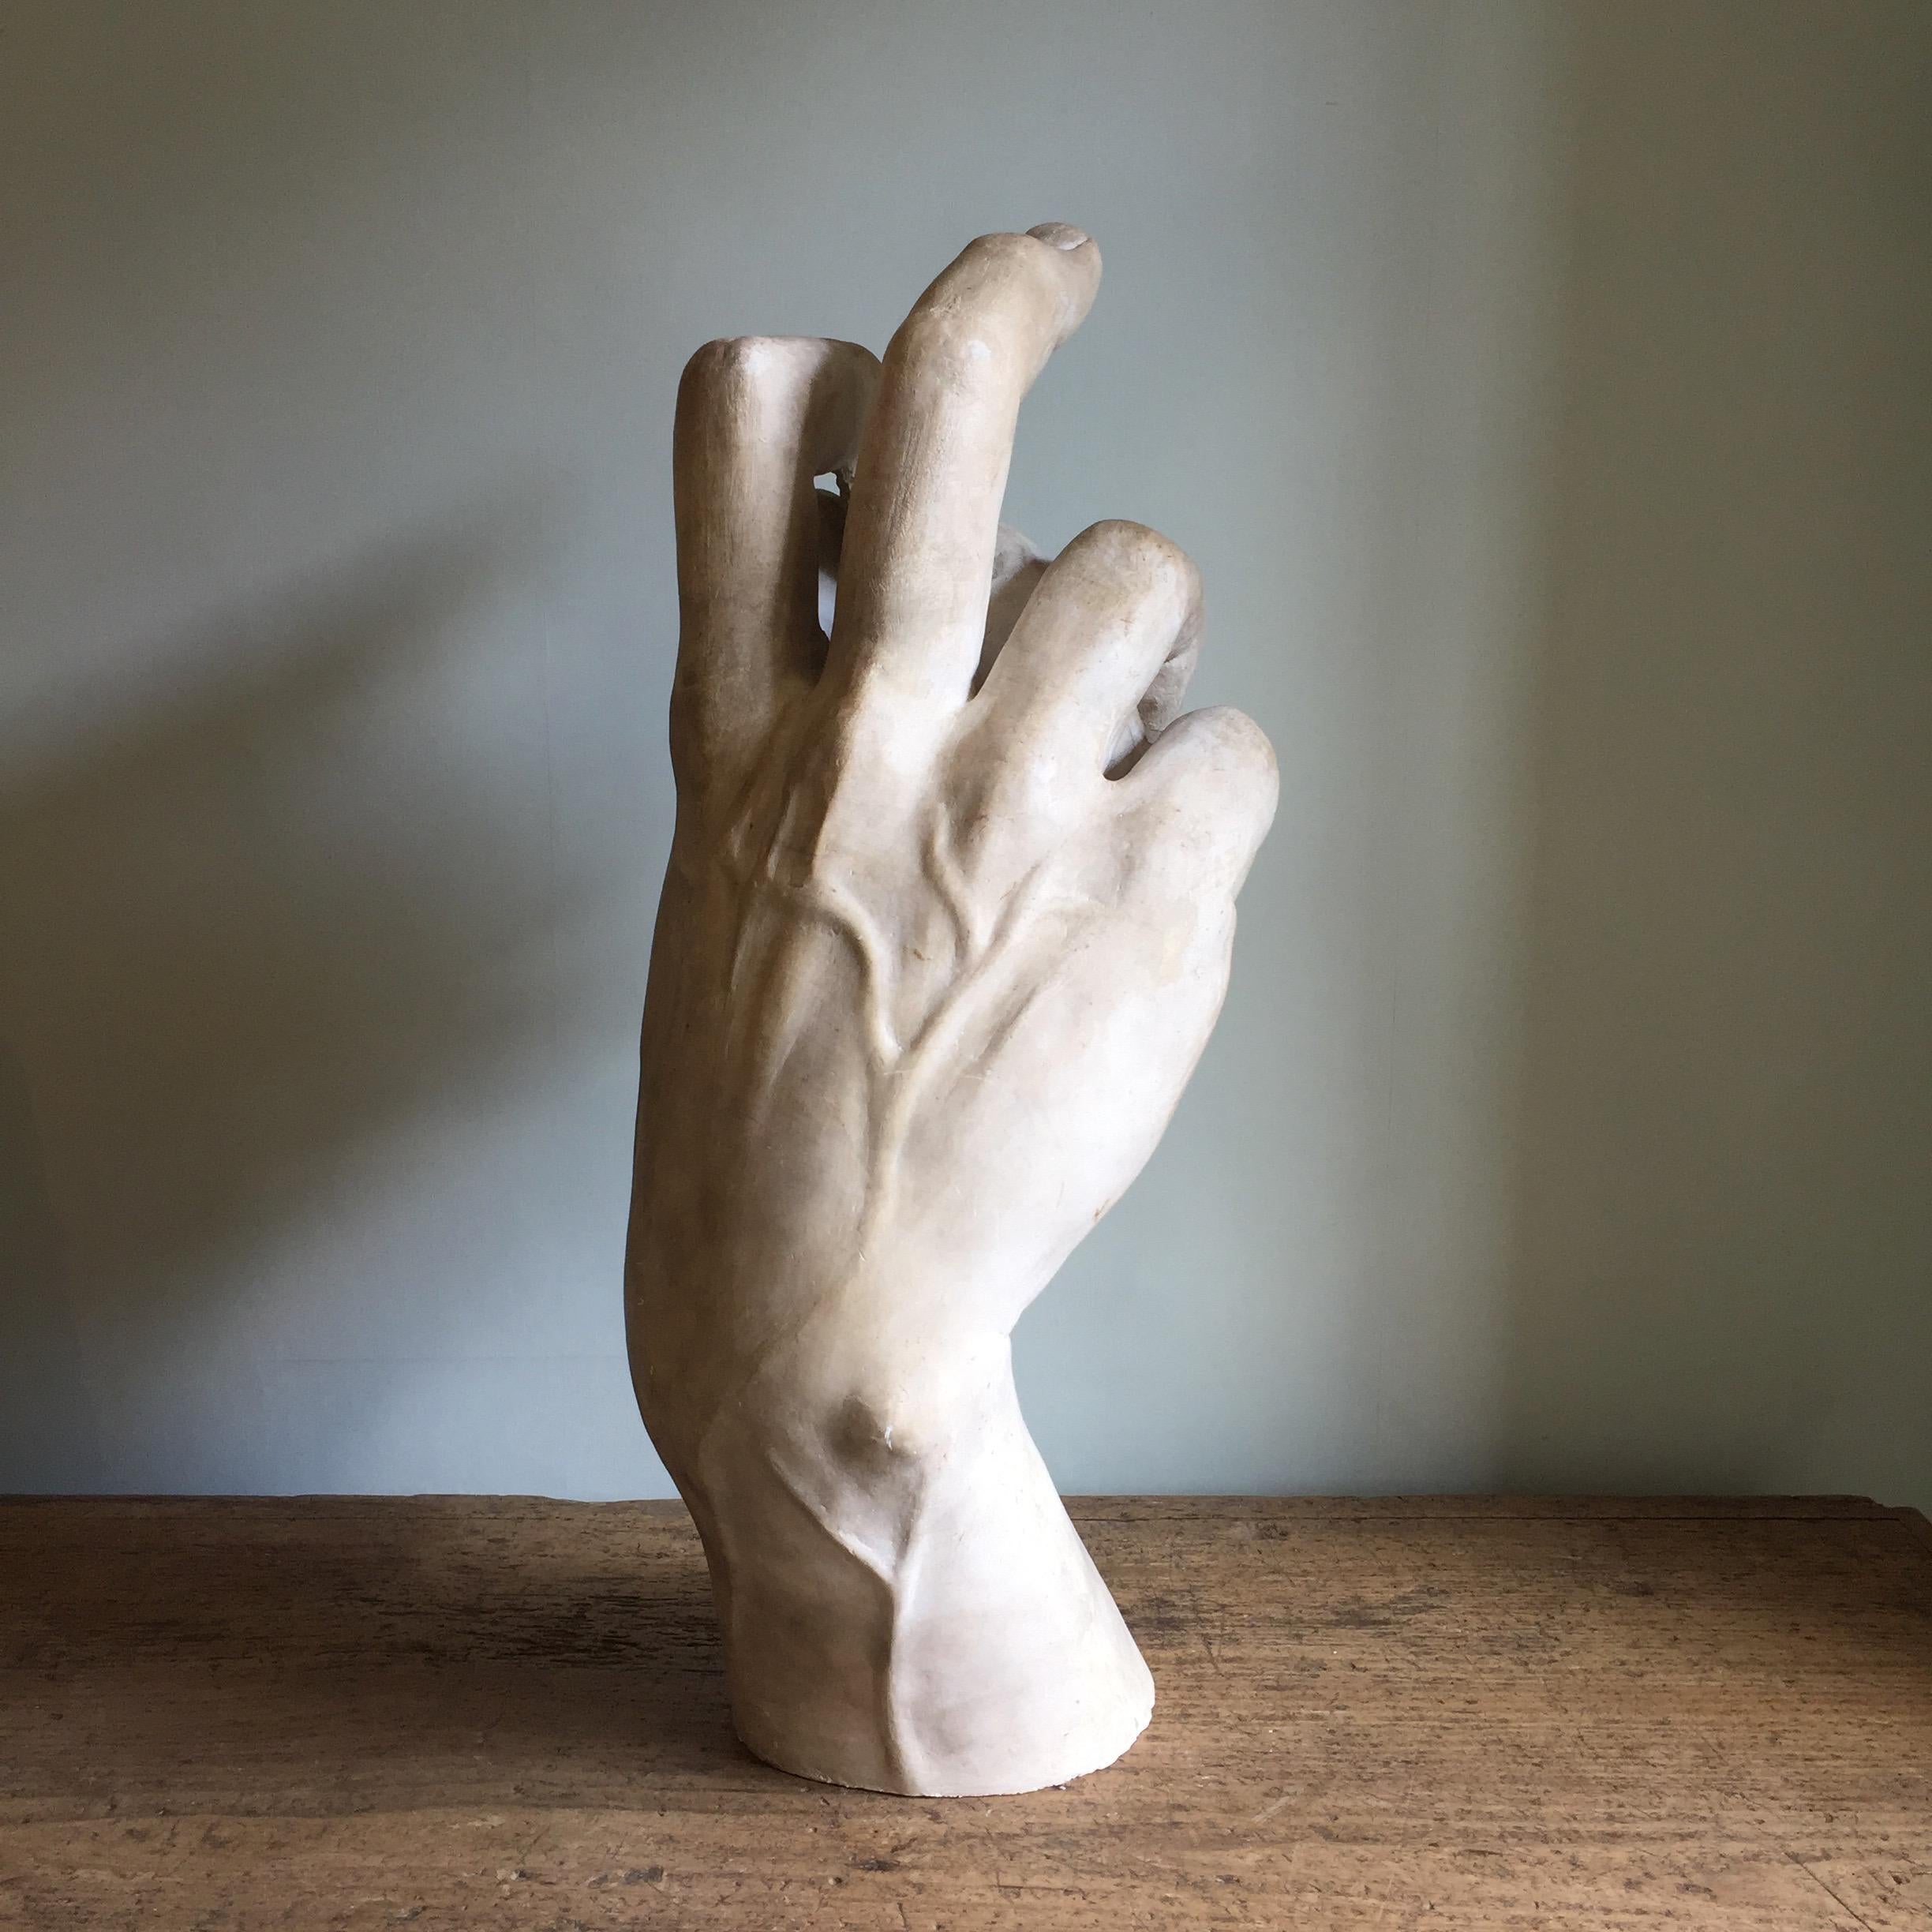 A wonderfully accurate plaster right hand of Michelangelo's David. 

We believe due to the huge scale of the piece that it is a 1:1 representation of the famous marble sculpture which stands almost 17ft high.

The original masterpiece is on